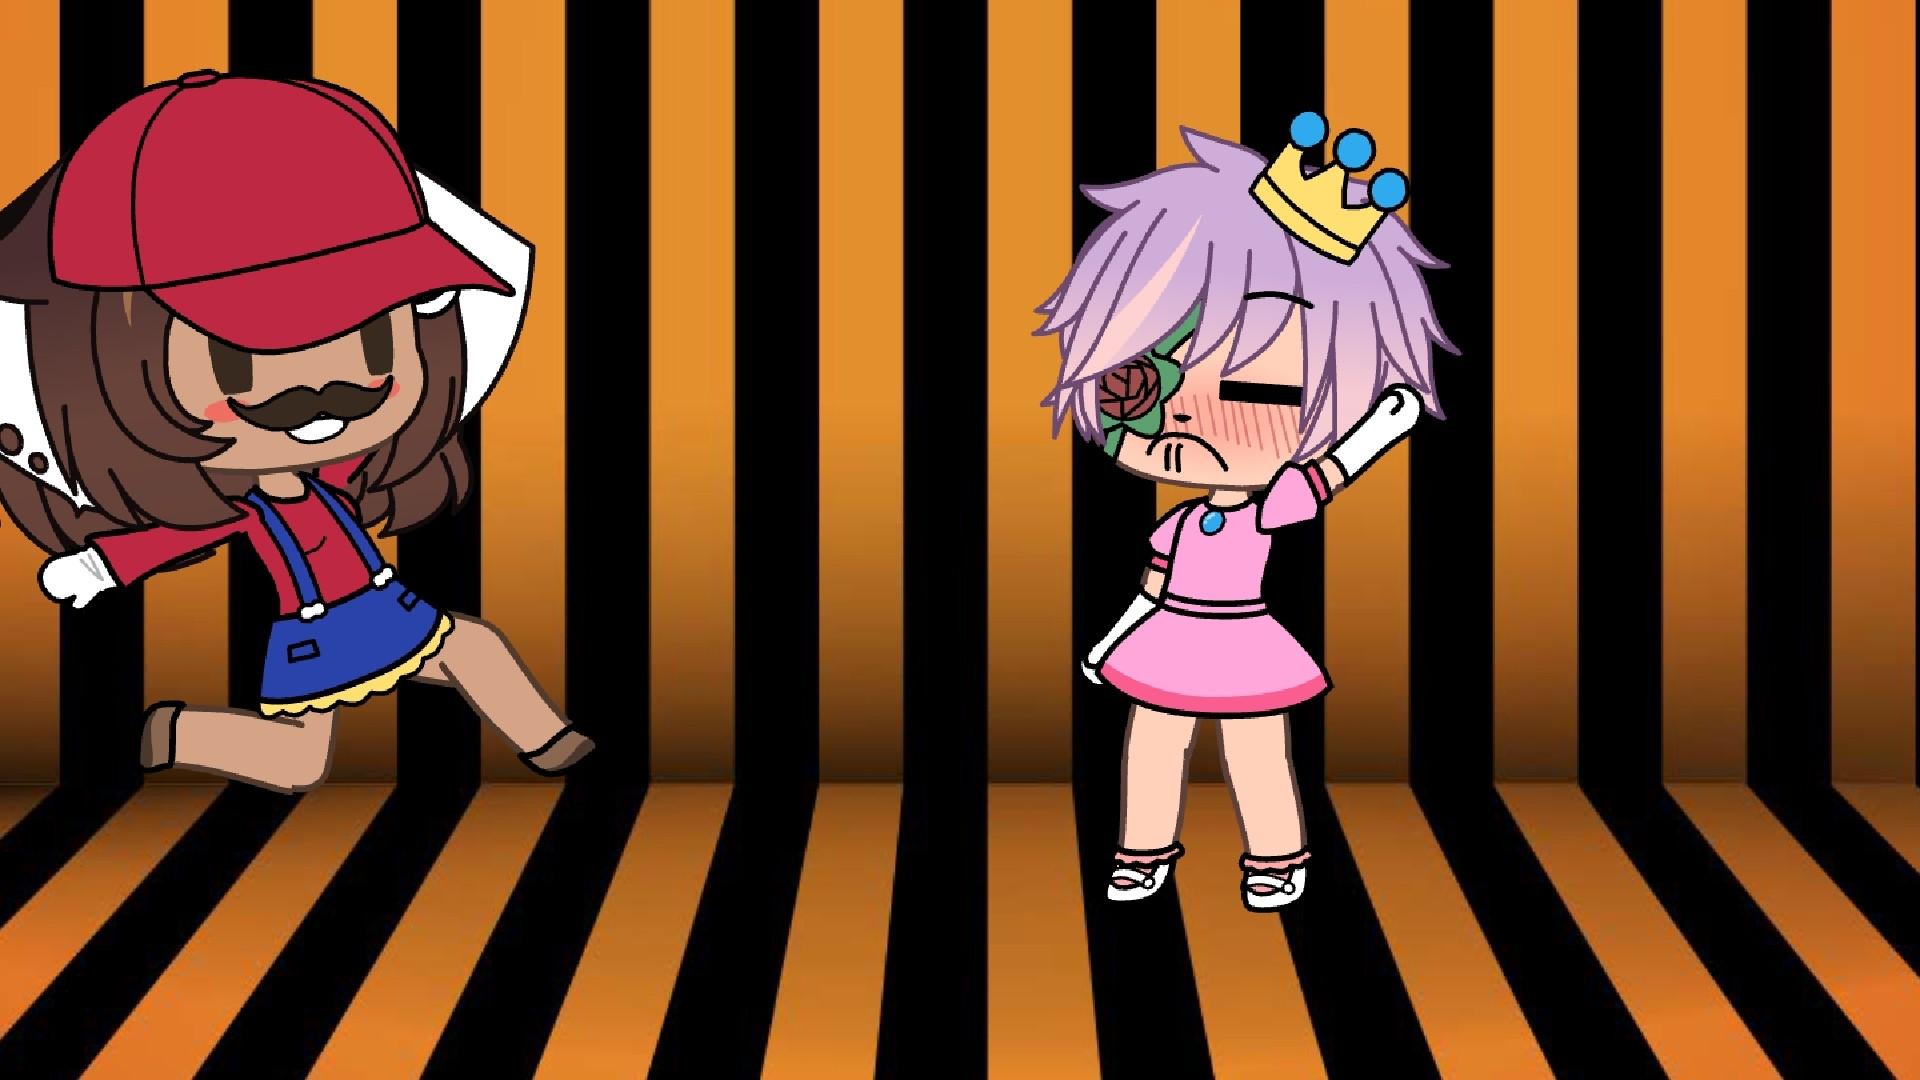 Buy Gacha Life Scary Outfits Cheap Online